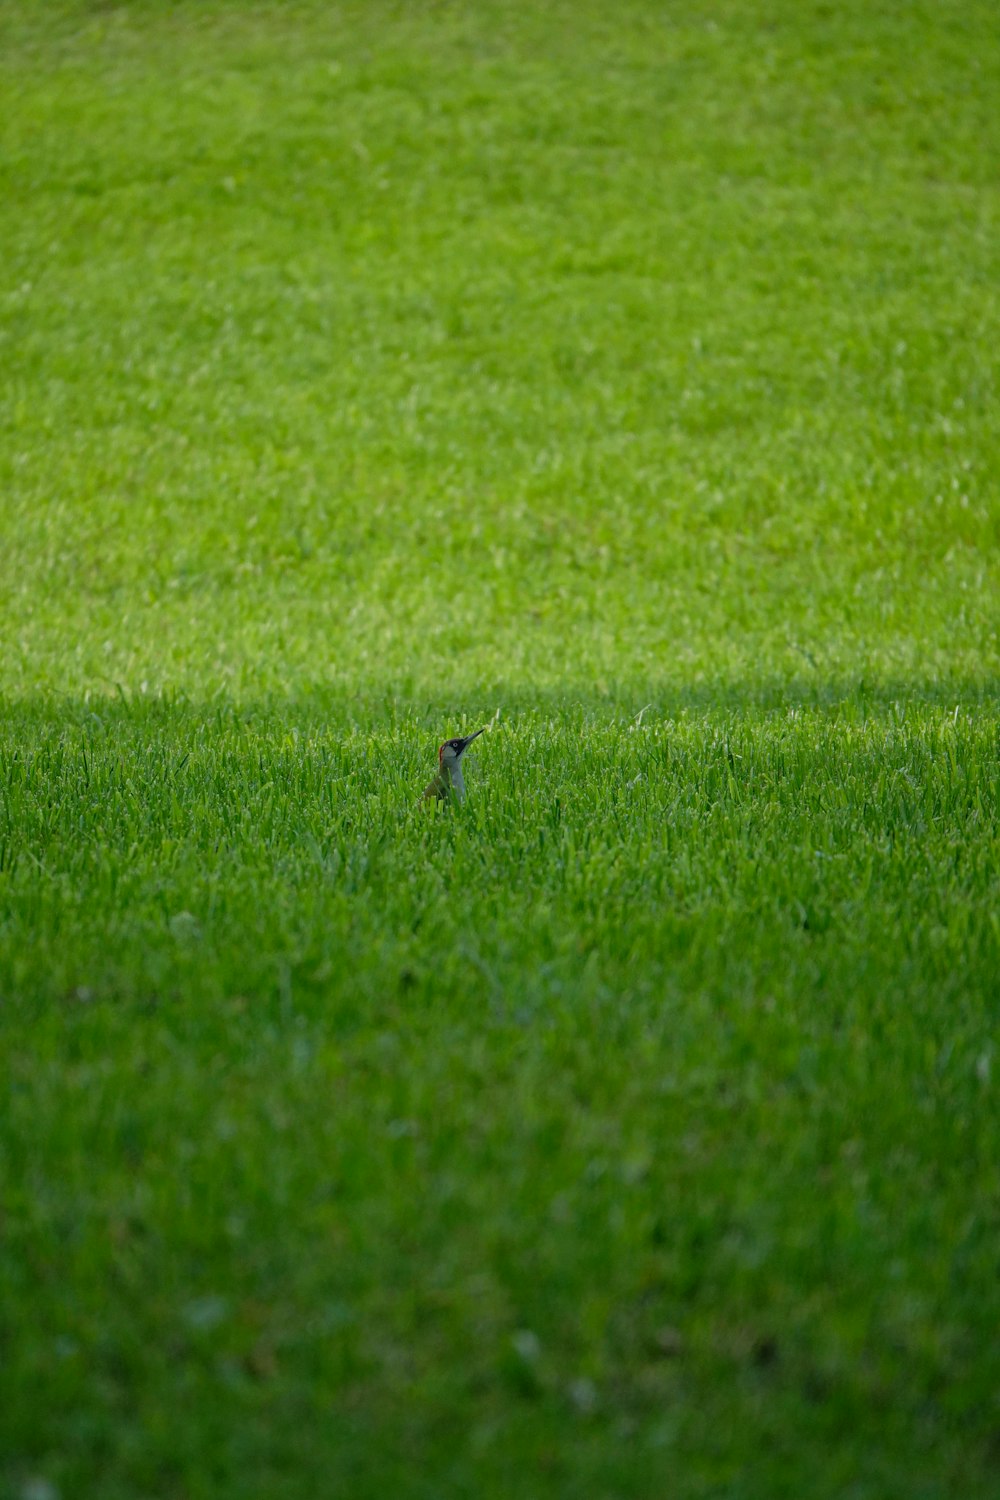 a small bird sitting in the middle of a grassy field